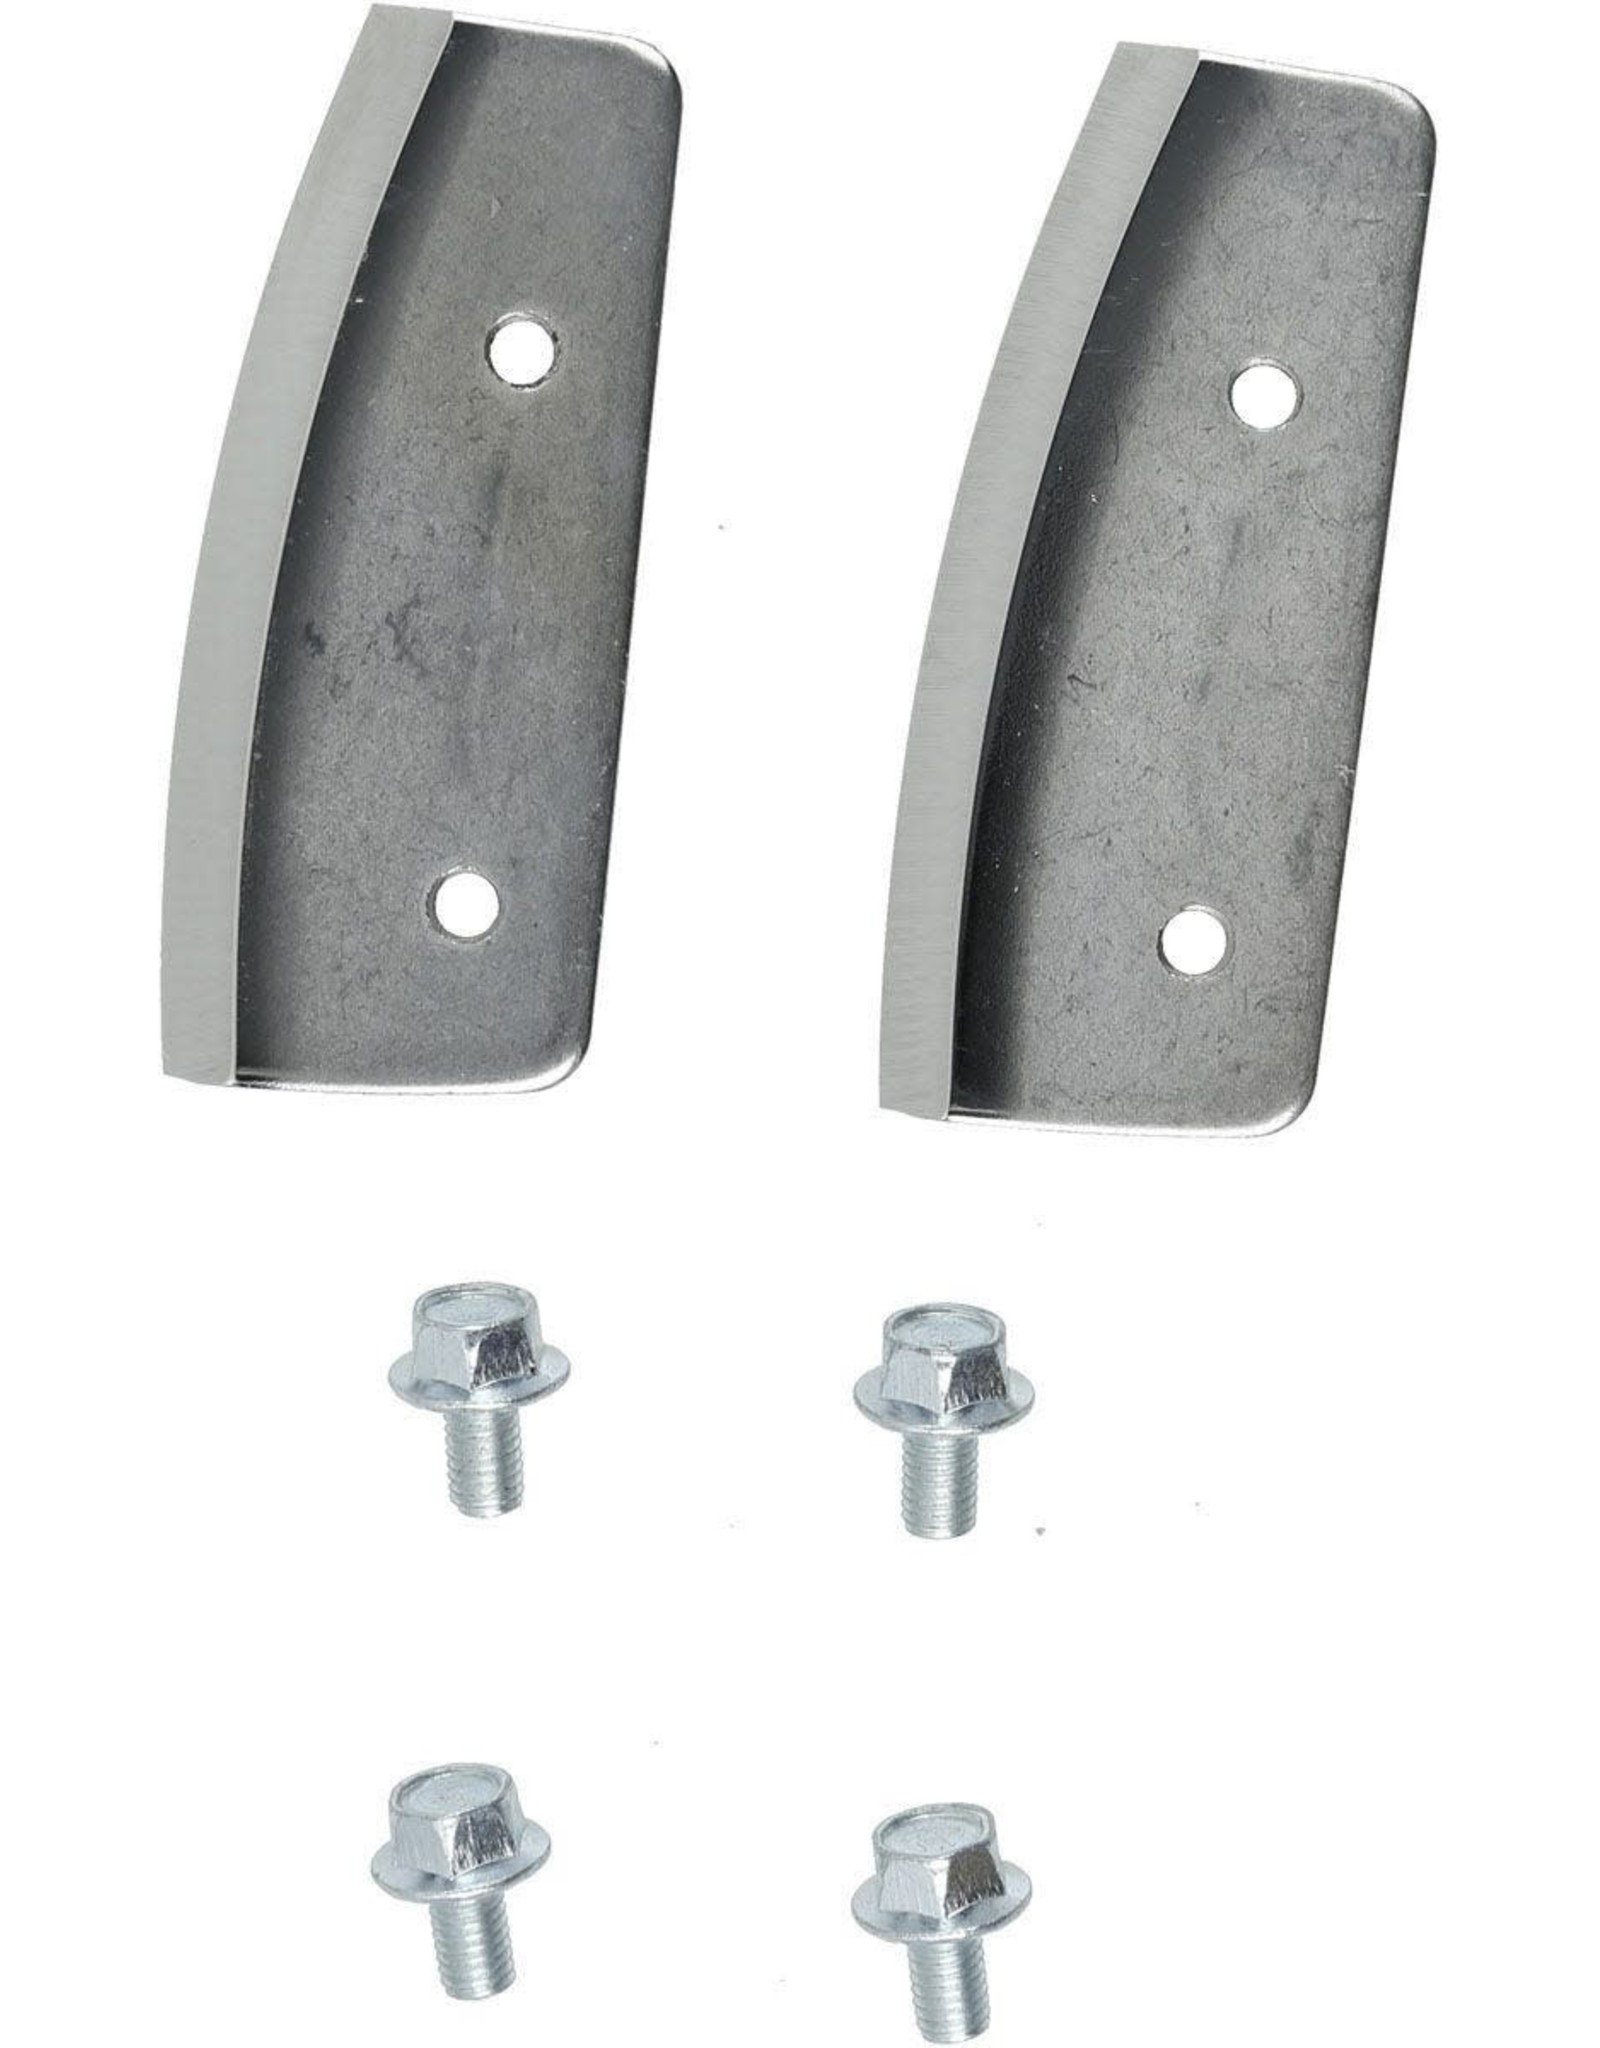 NORDIC NORDIC REPLACEMENT BLADES